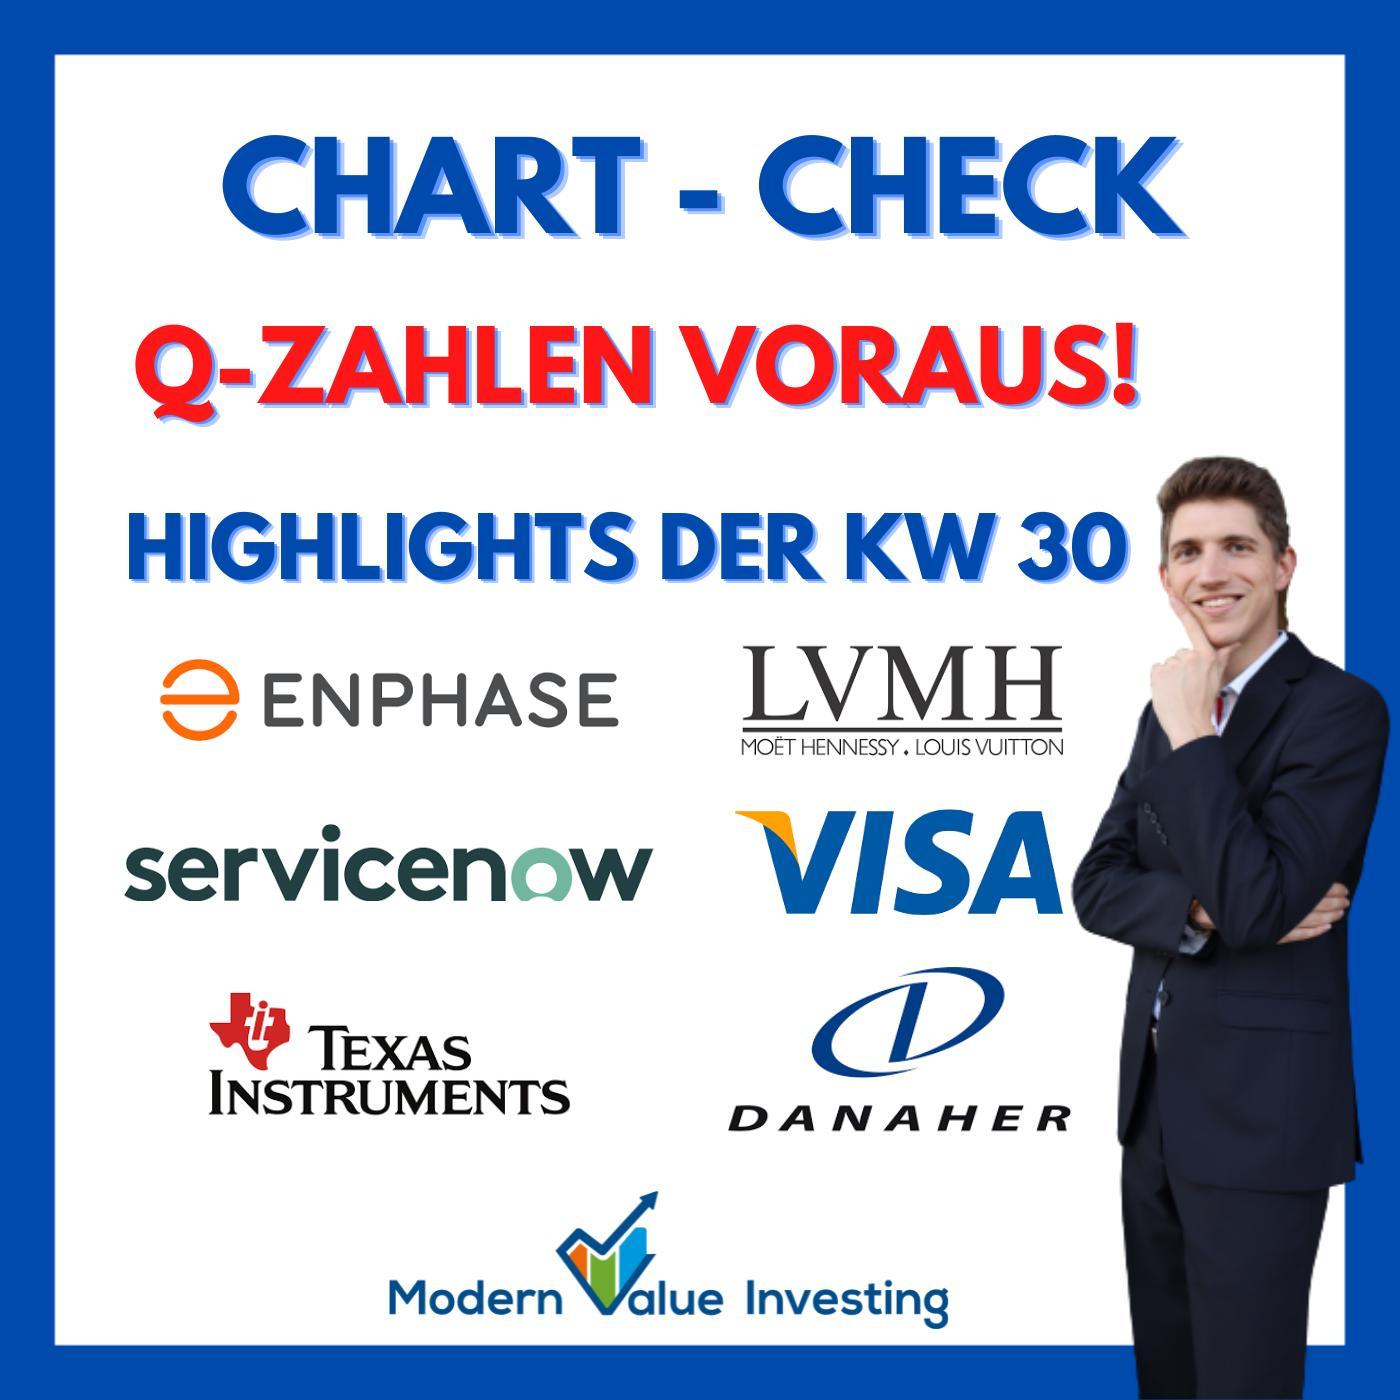 Danaher - Thermo Fisher - Visa - Texas Instruments - LVMH - Kering - Enphase - uvm. im Chart Check